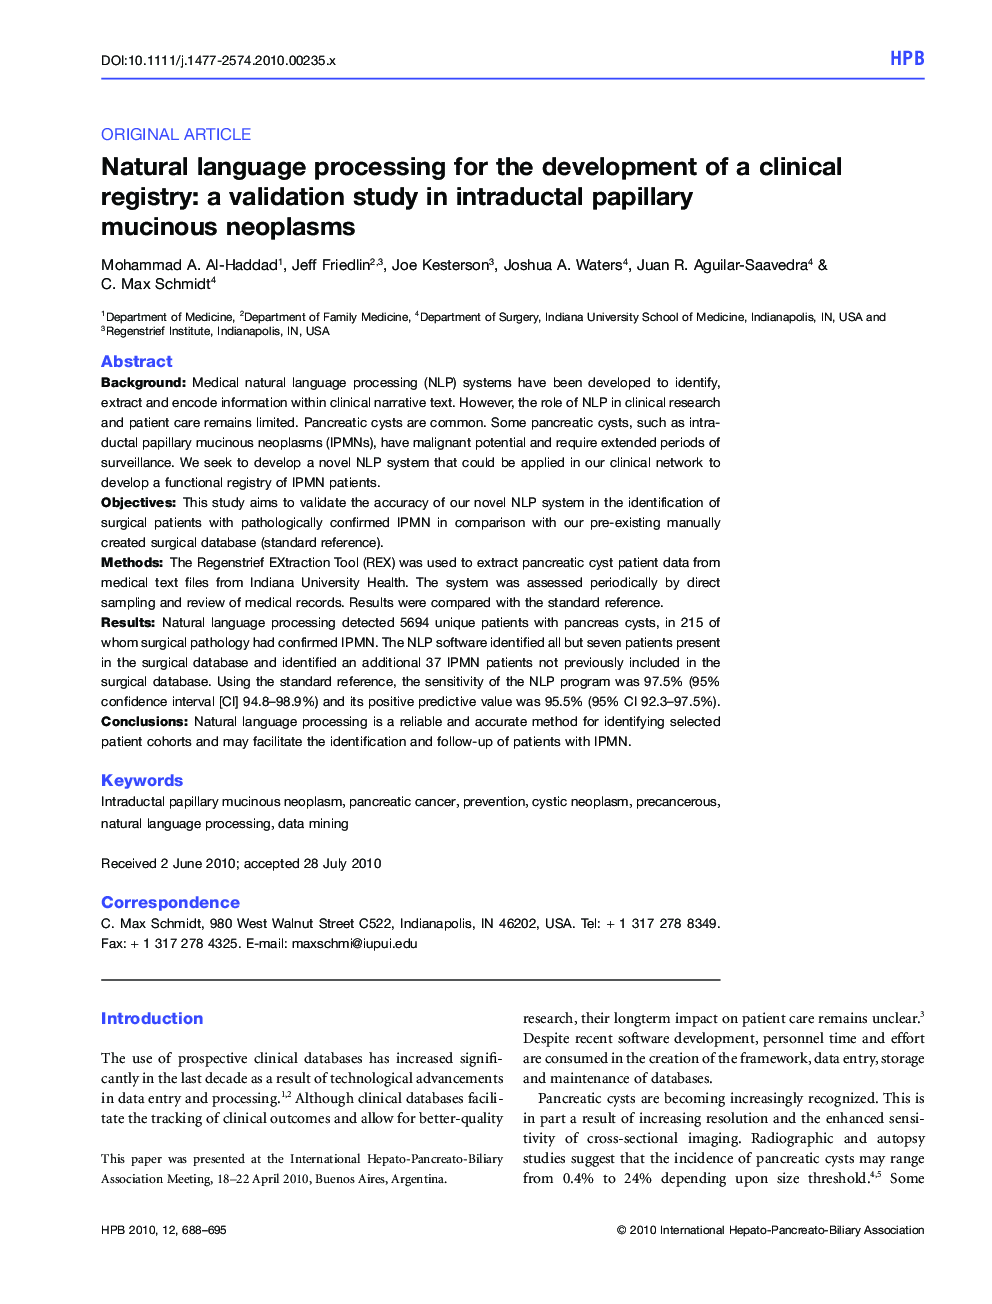 Natural language processing for the development of a clinical registry: a validation study in intraductal papillary mucinous neoplasms